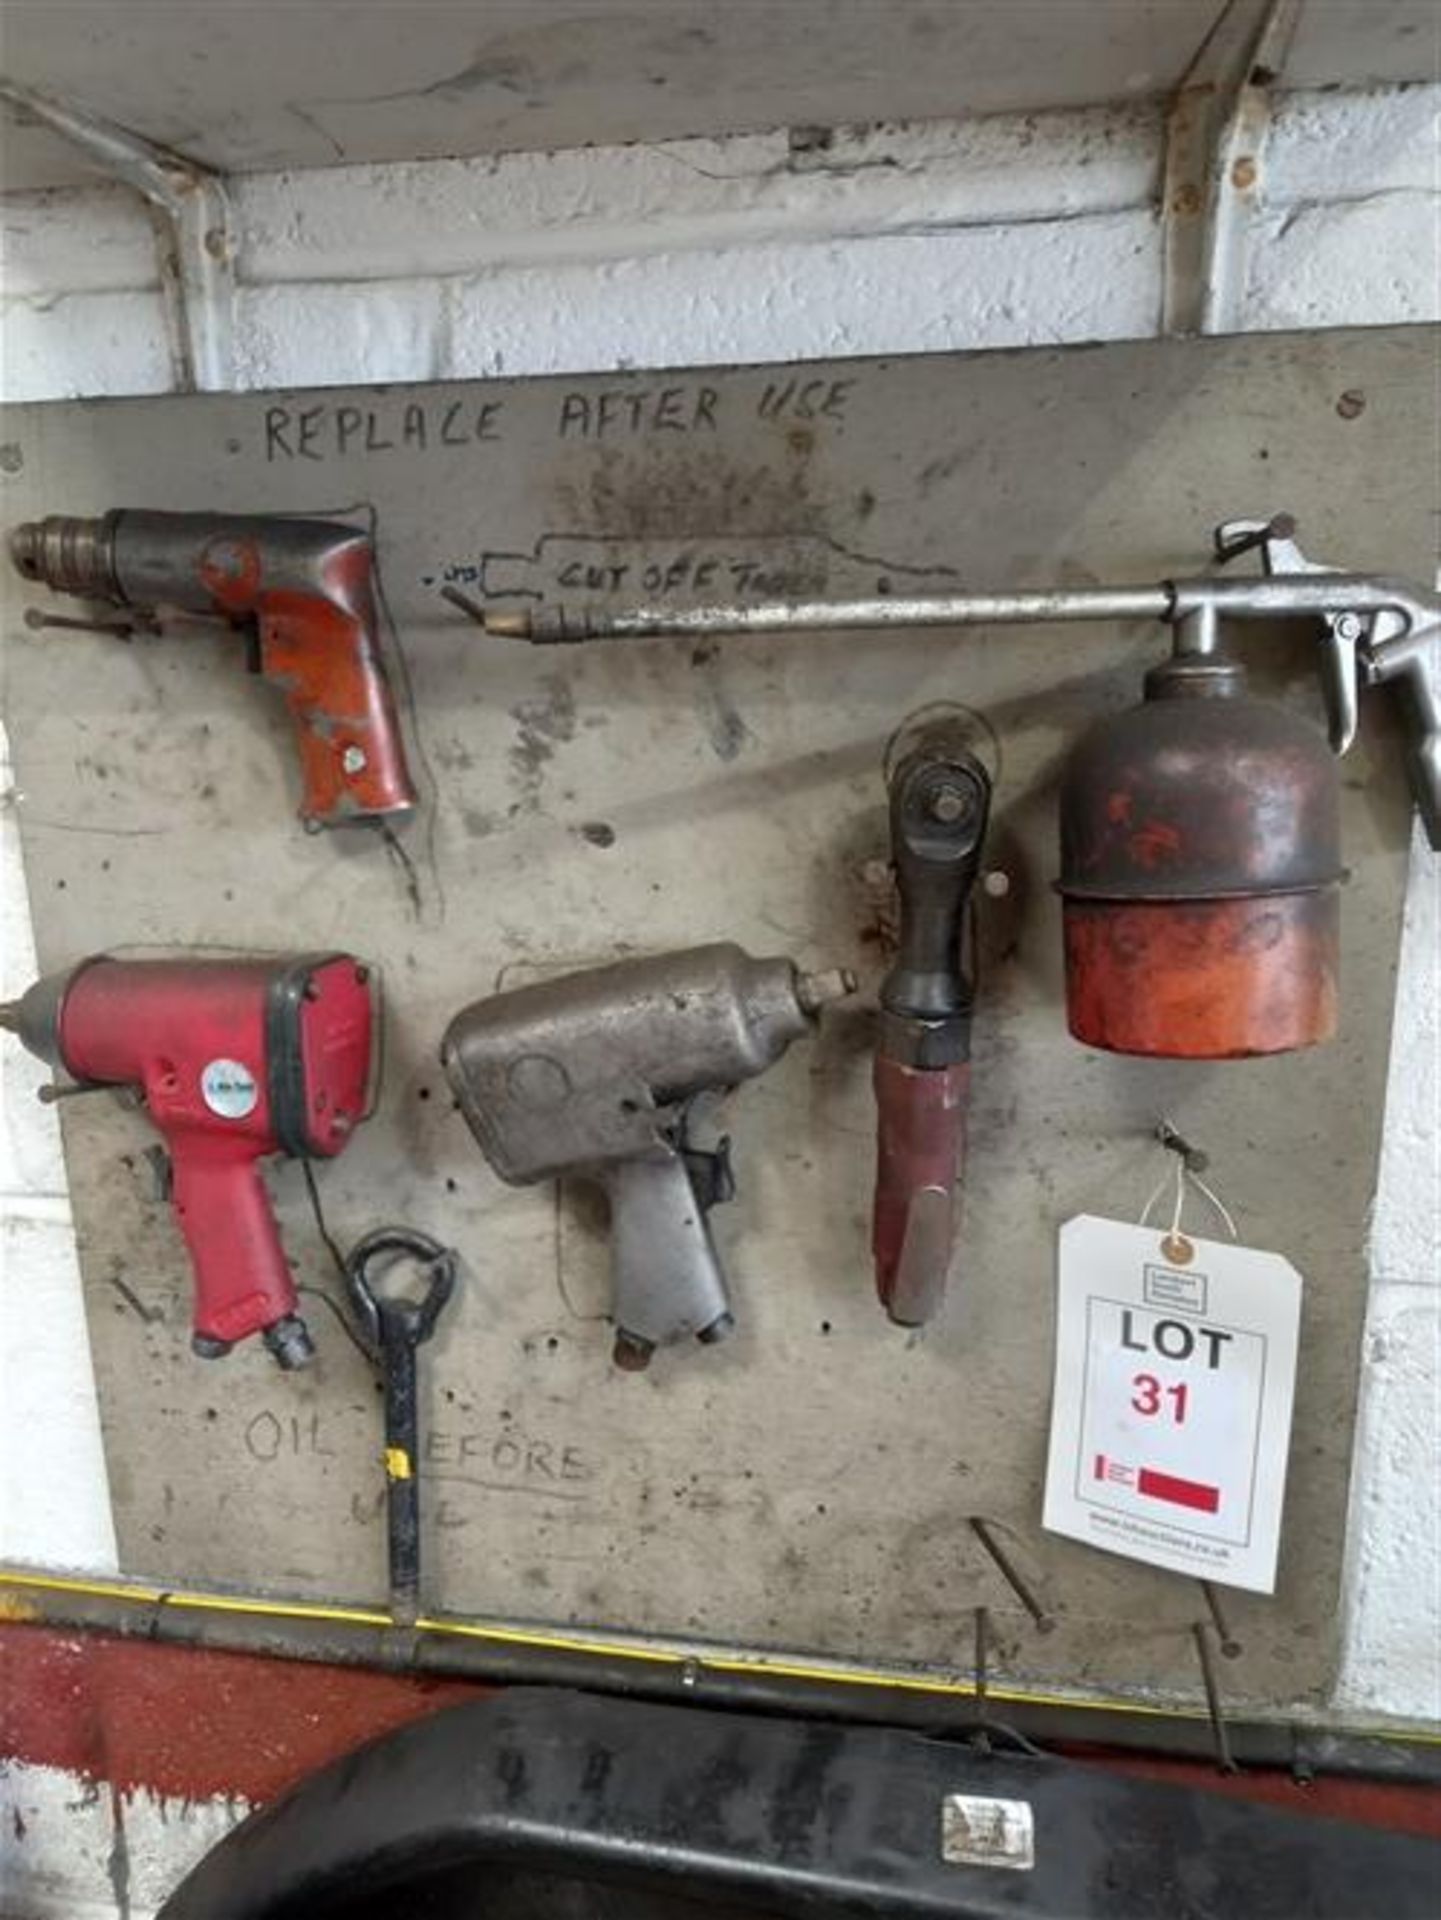 2 pneumatic impact wrenches, 1 x pneumatic pistol drill, 1 x pneumatic 90° wrench and 1 x